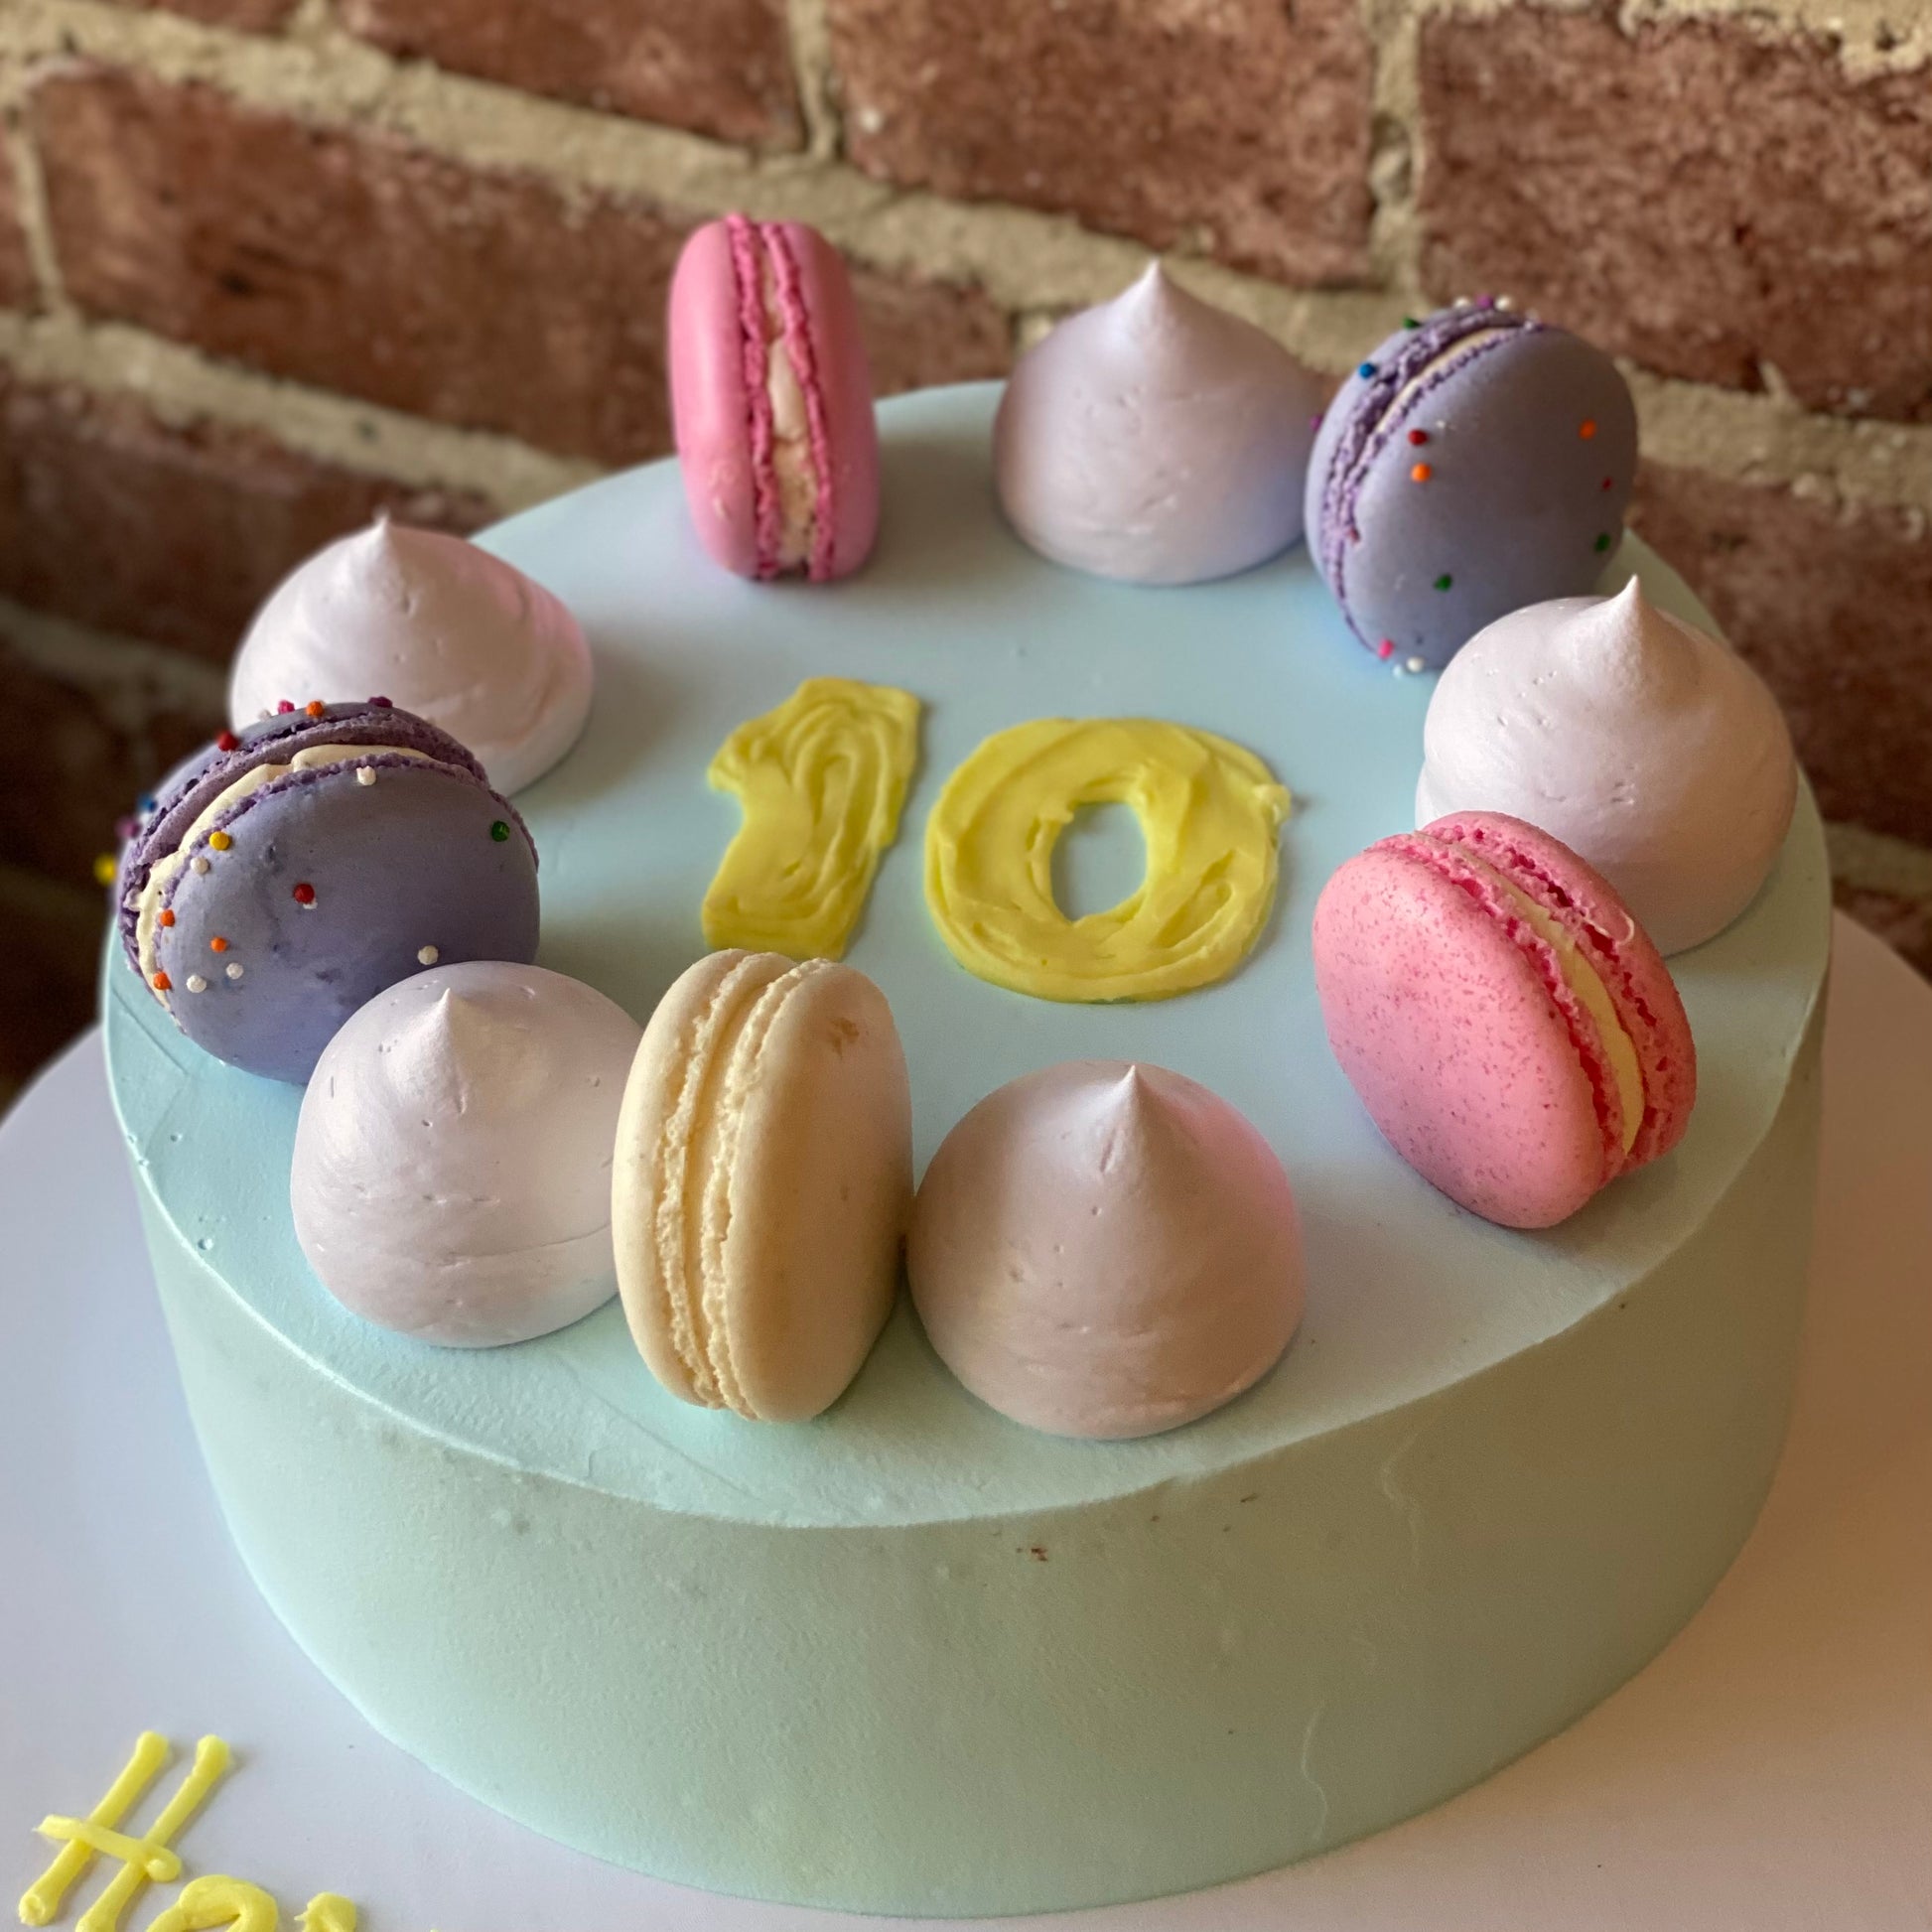 Pastel blue cake with macarons and dollops